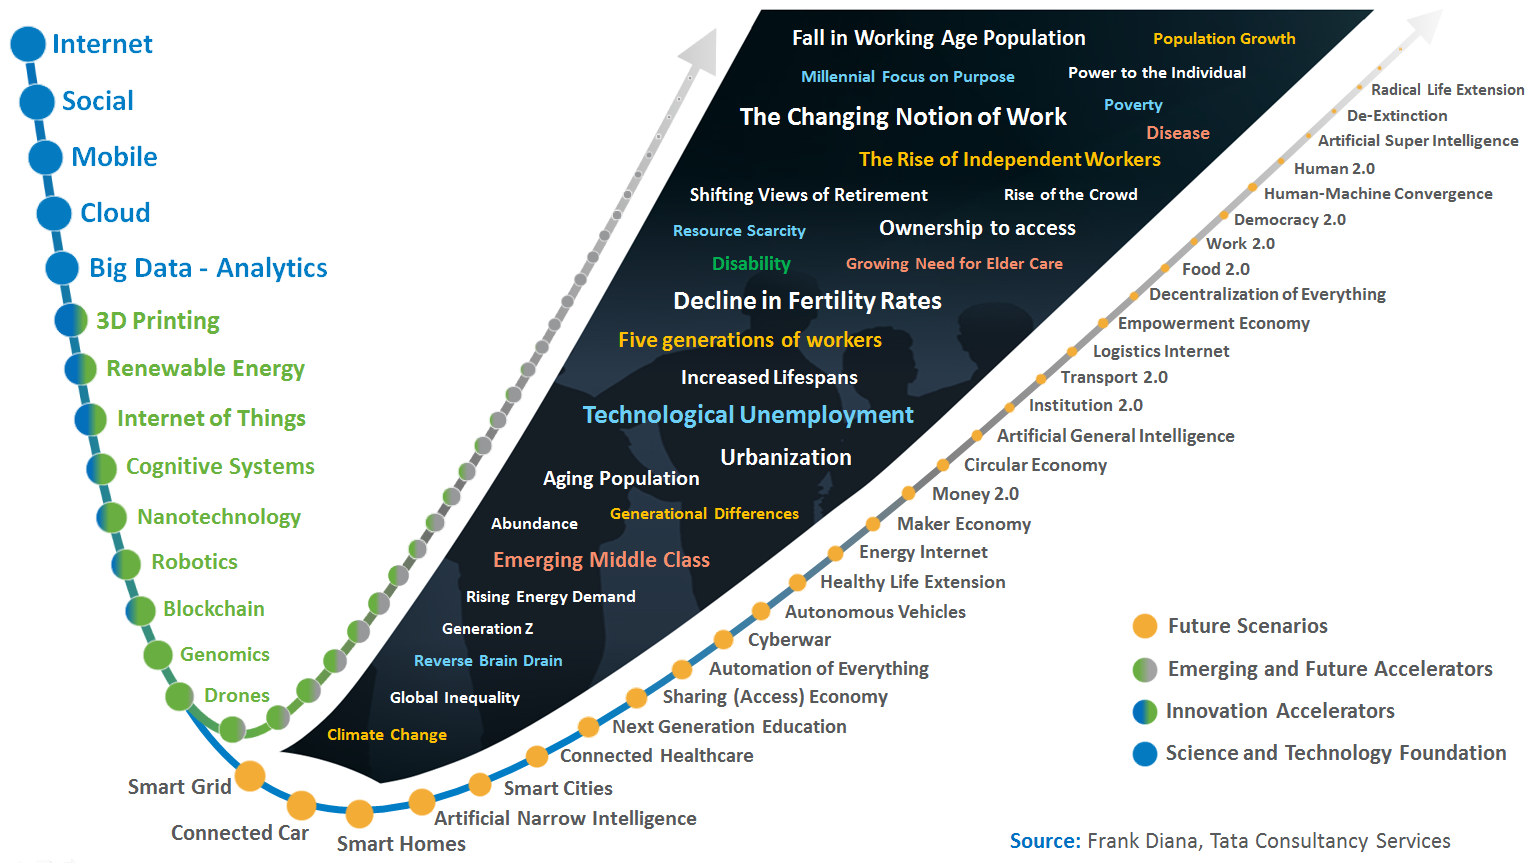 Chart of emerging technologies over time.